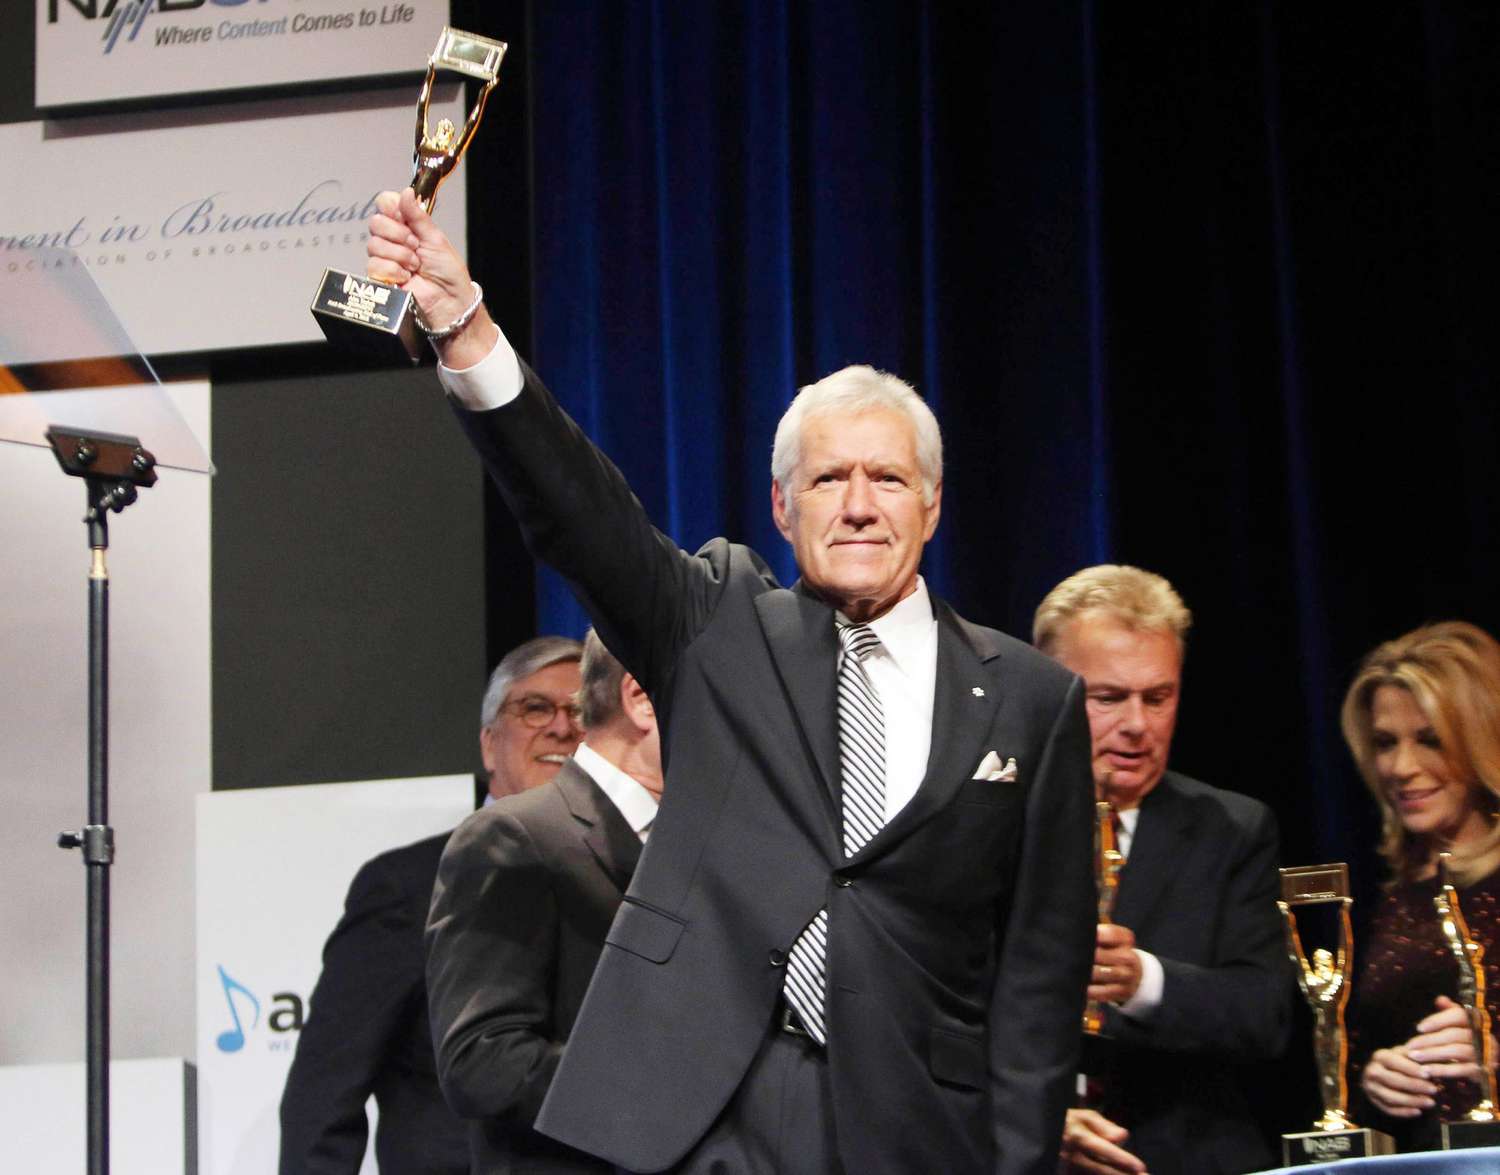 Alex Trebek being inducted into the NAB Broadcasting Hall of Fame in 2018